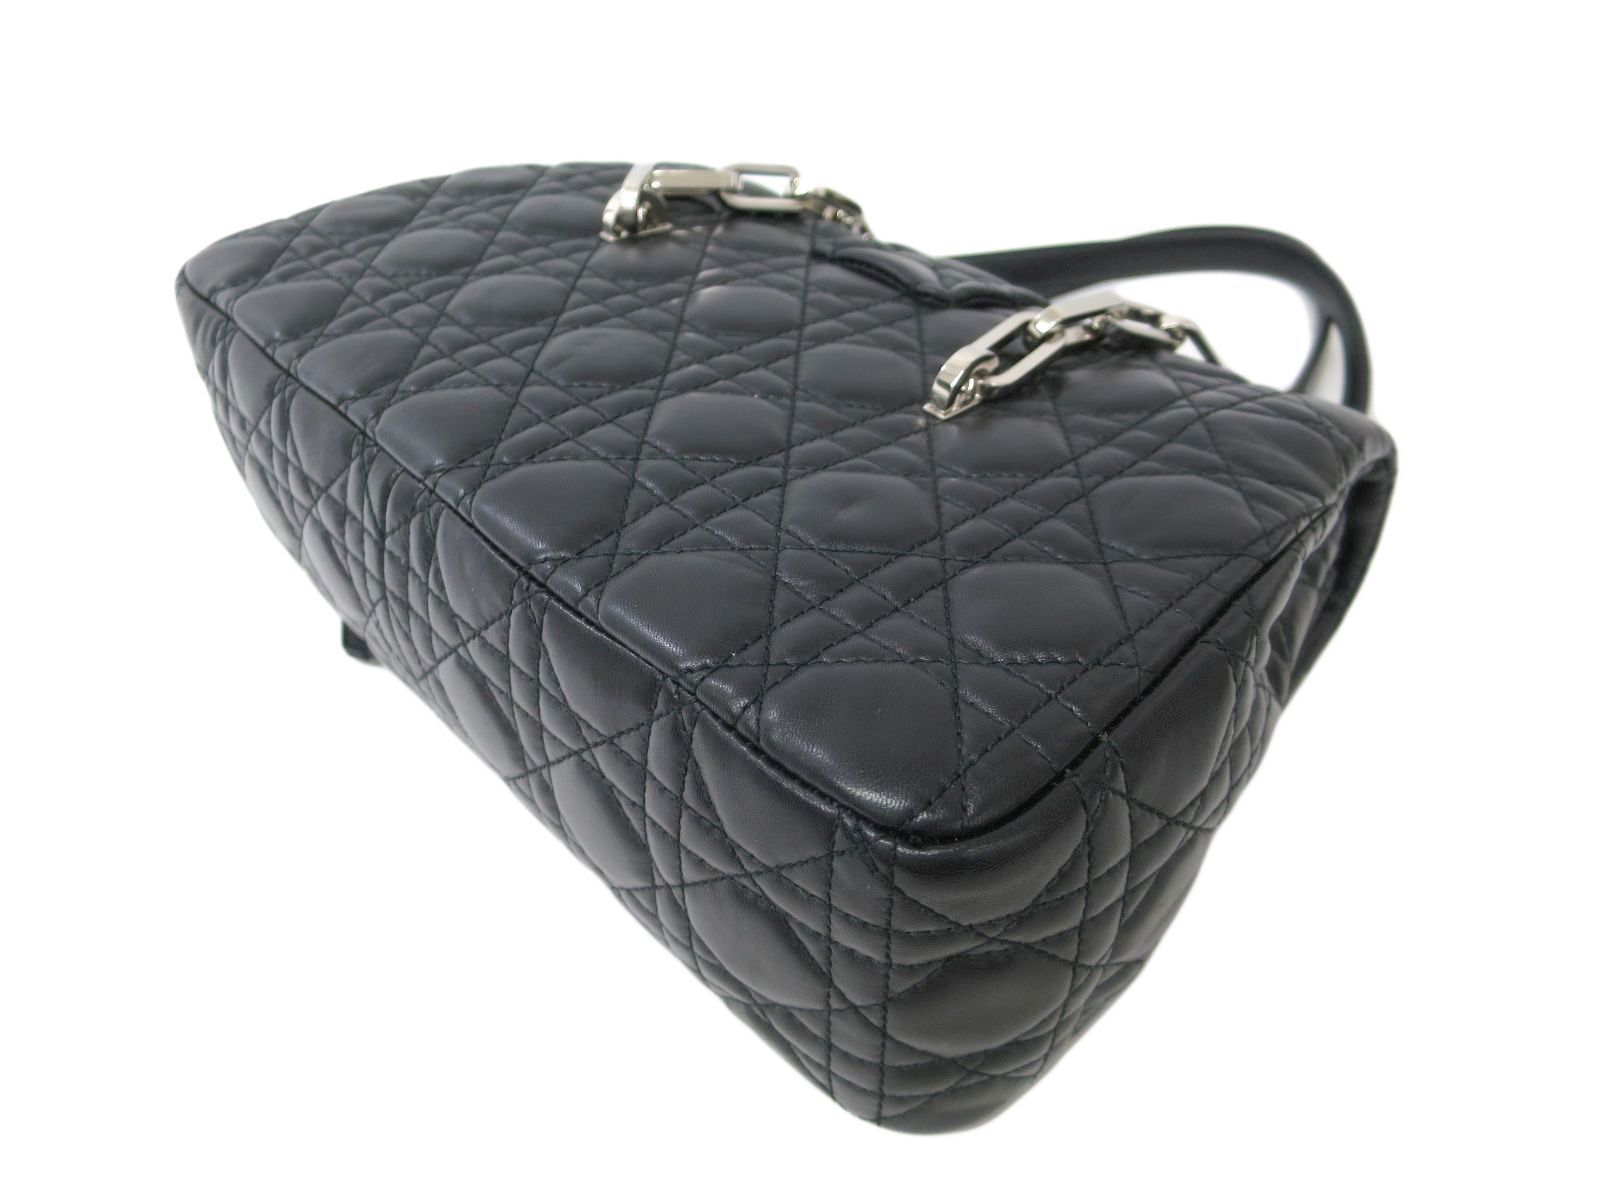 Buy & Consign Authentic Dior Black Cannage Quilted Leather Large New Lock Satchel at The Plush Posh